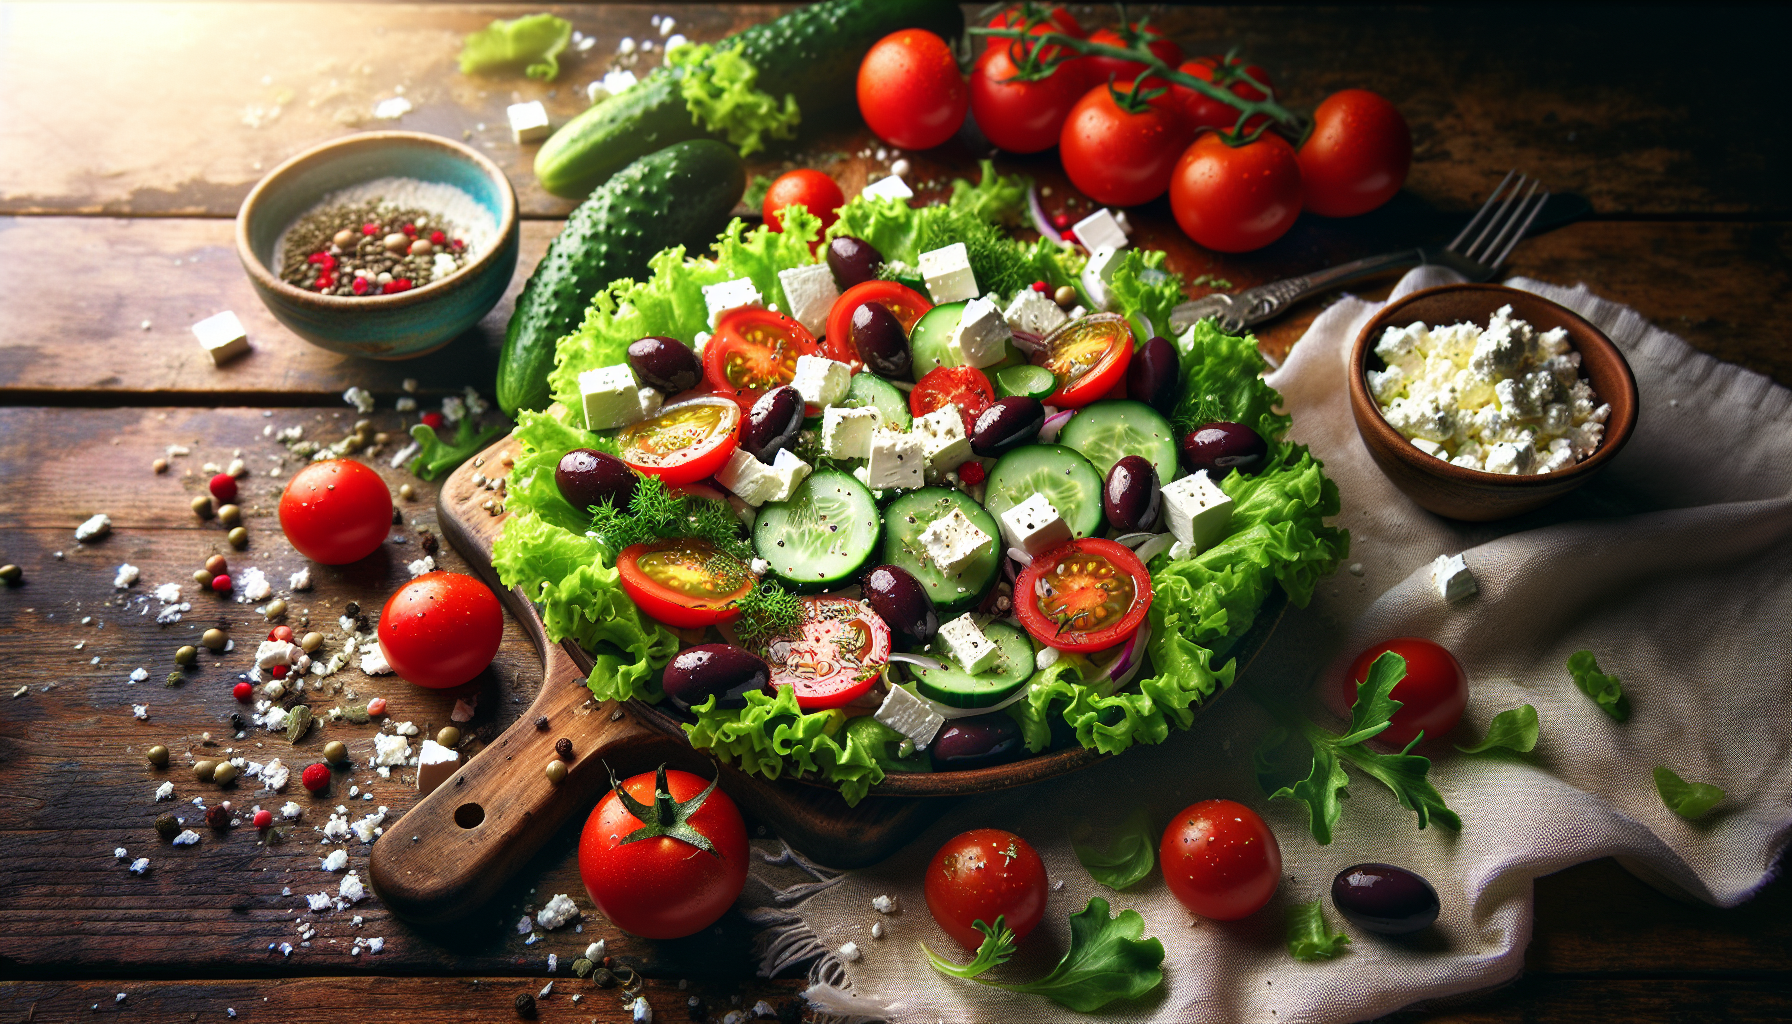 Whats Your Healthy Twist On A Classic Greek Salad For A Light Lunch?